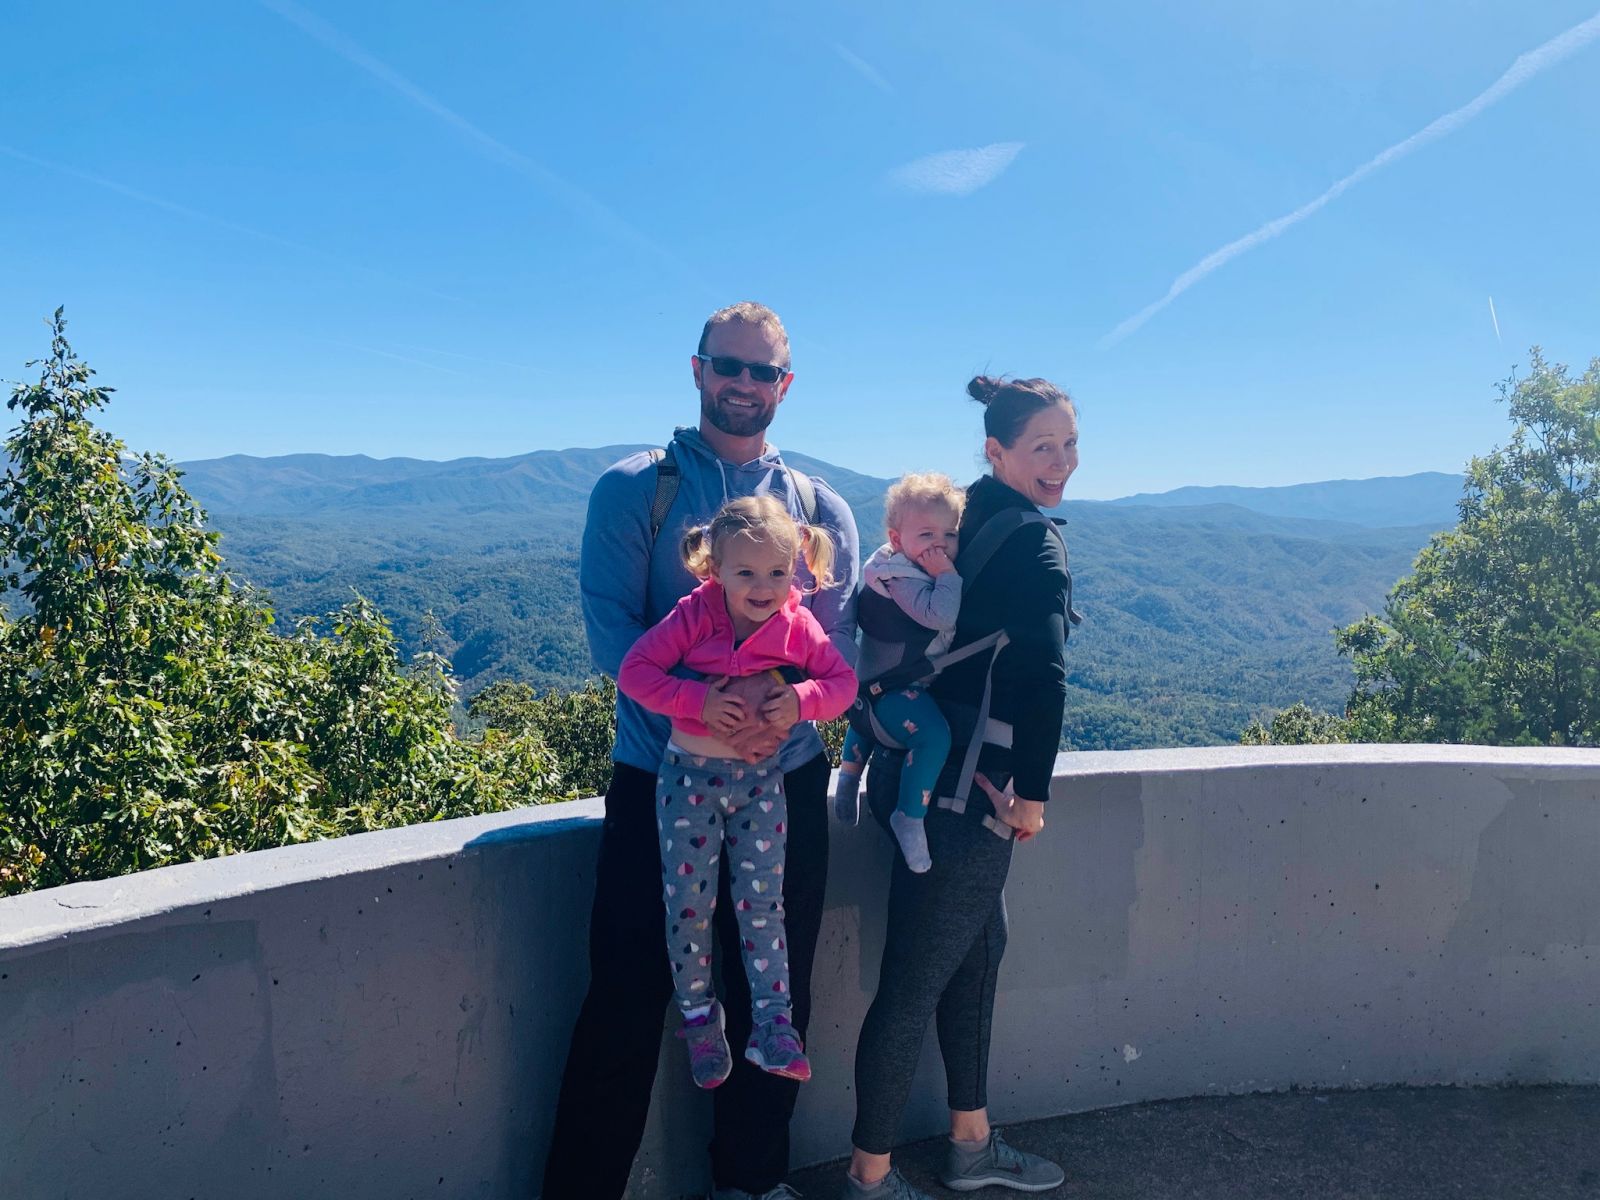 Hike With A View In The Smokies